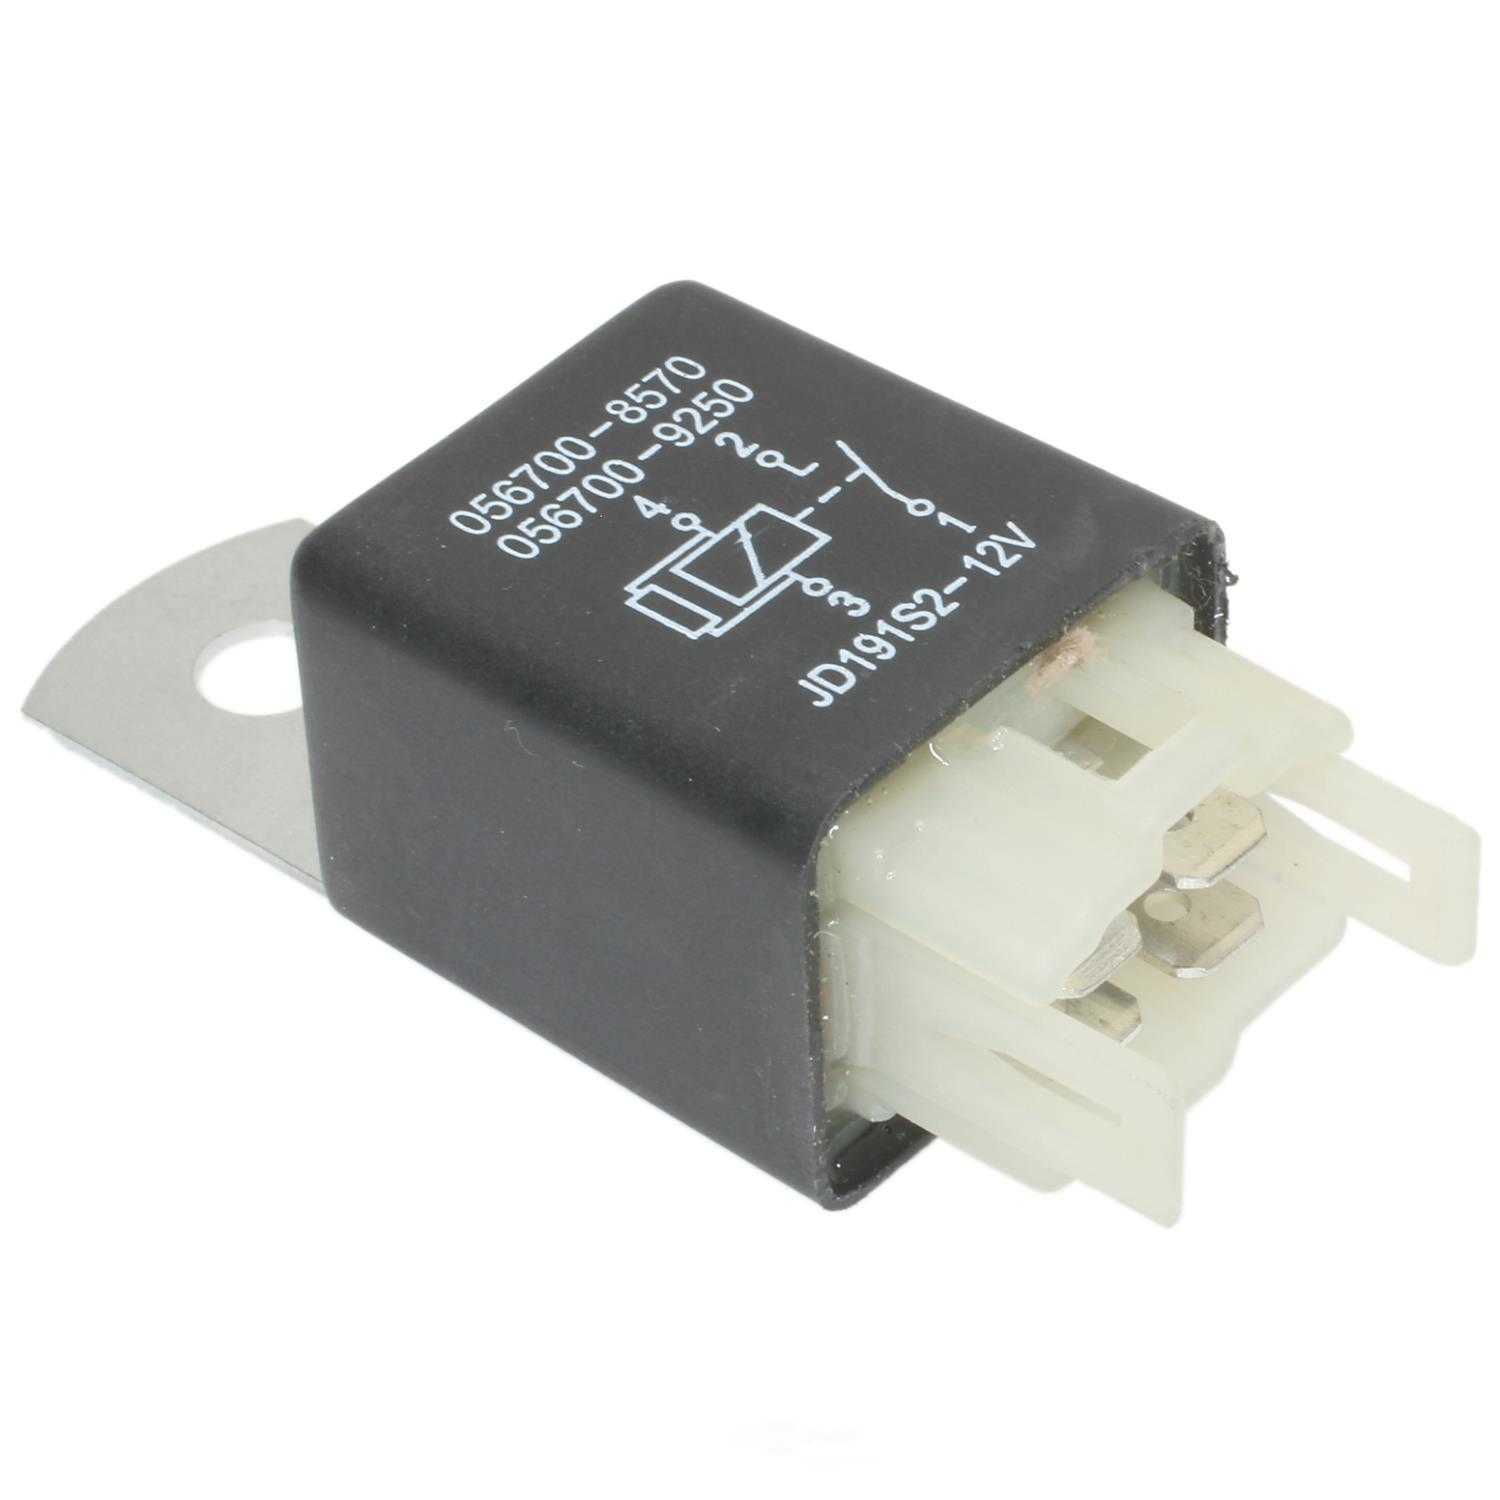 STANDARD MOTOR PRODUCTS - Multi Purpose Relay - STA RY-171